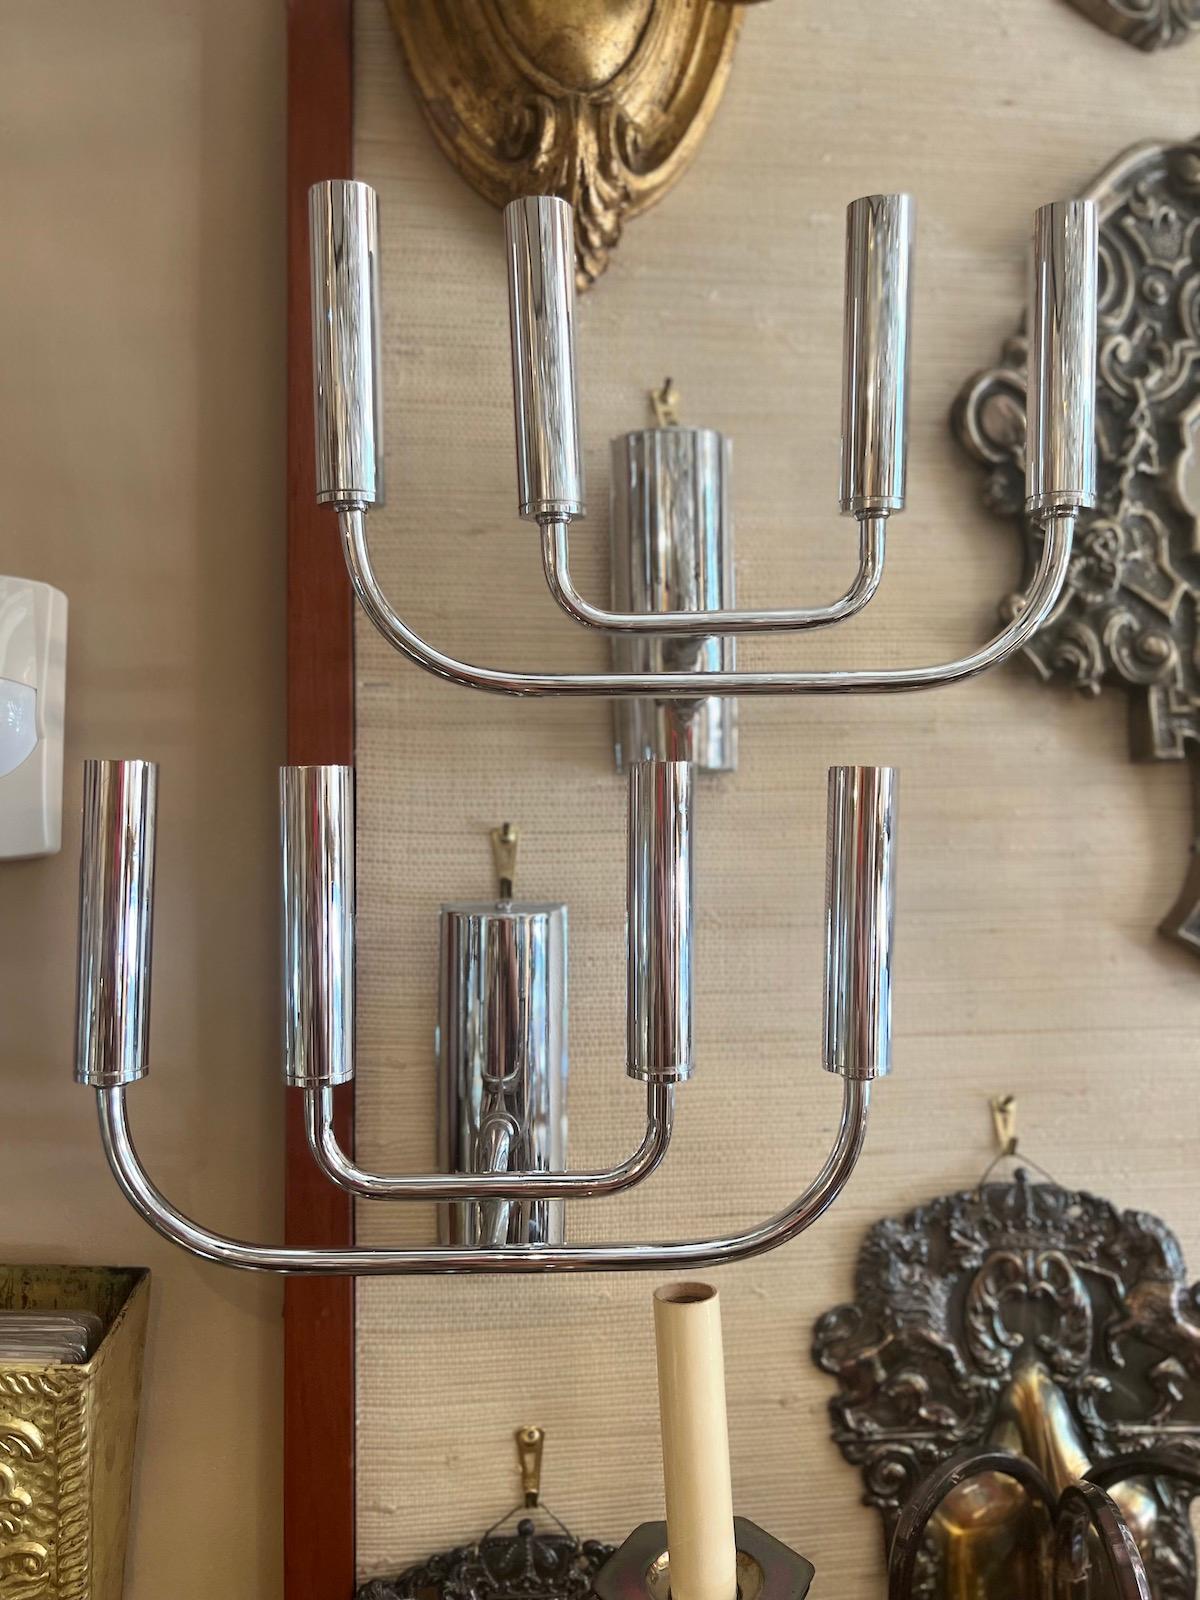 Pair of circa 1950s Italian nickel plated four lights sconces.

Measurements:
Height: 7.5